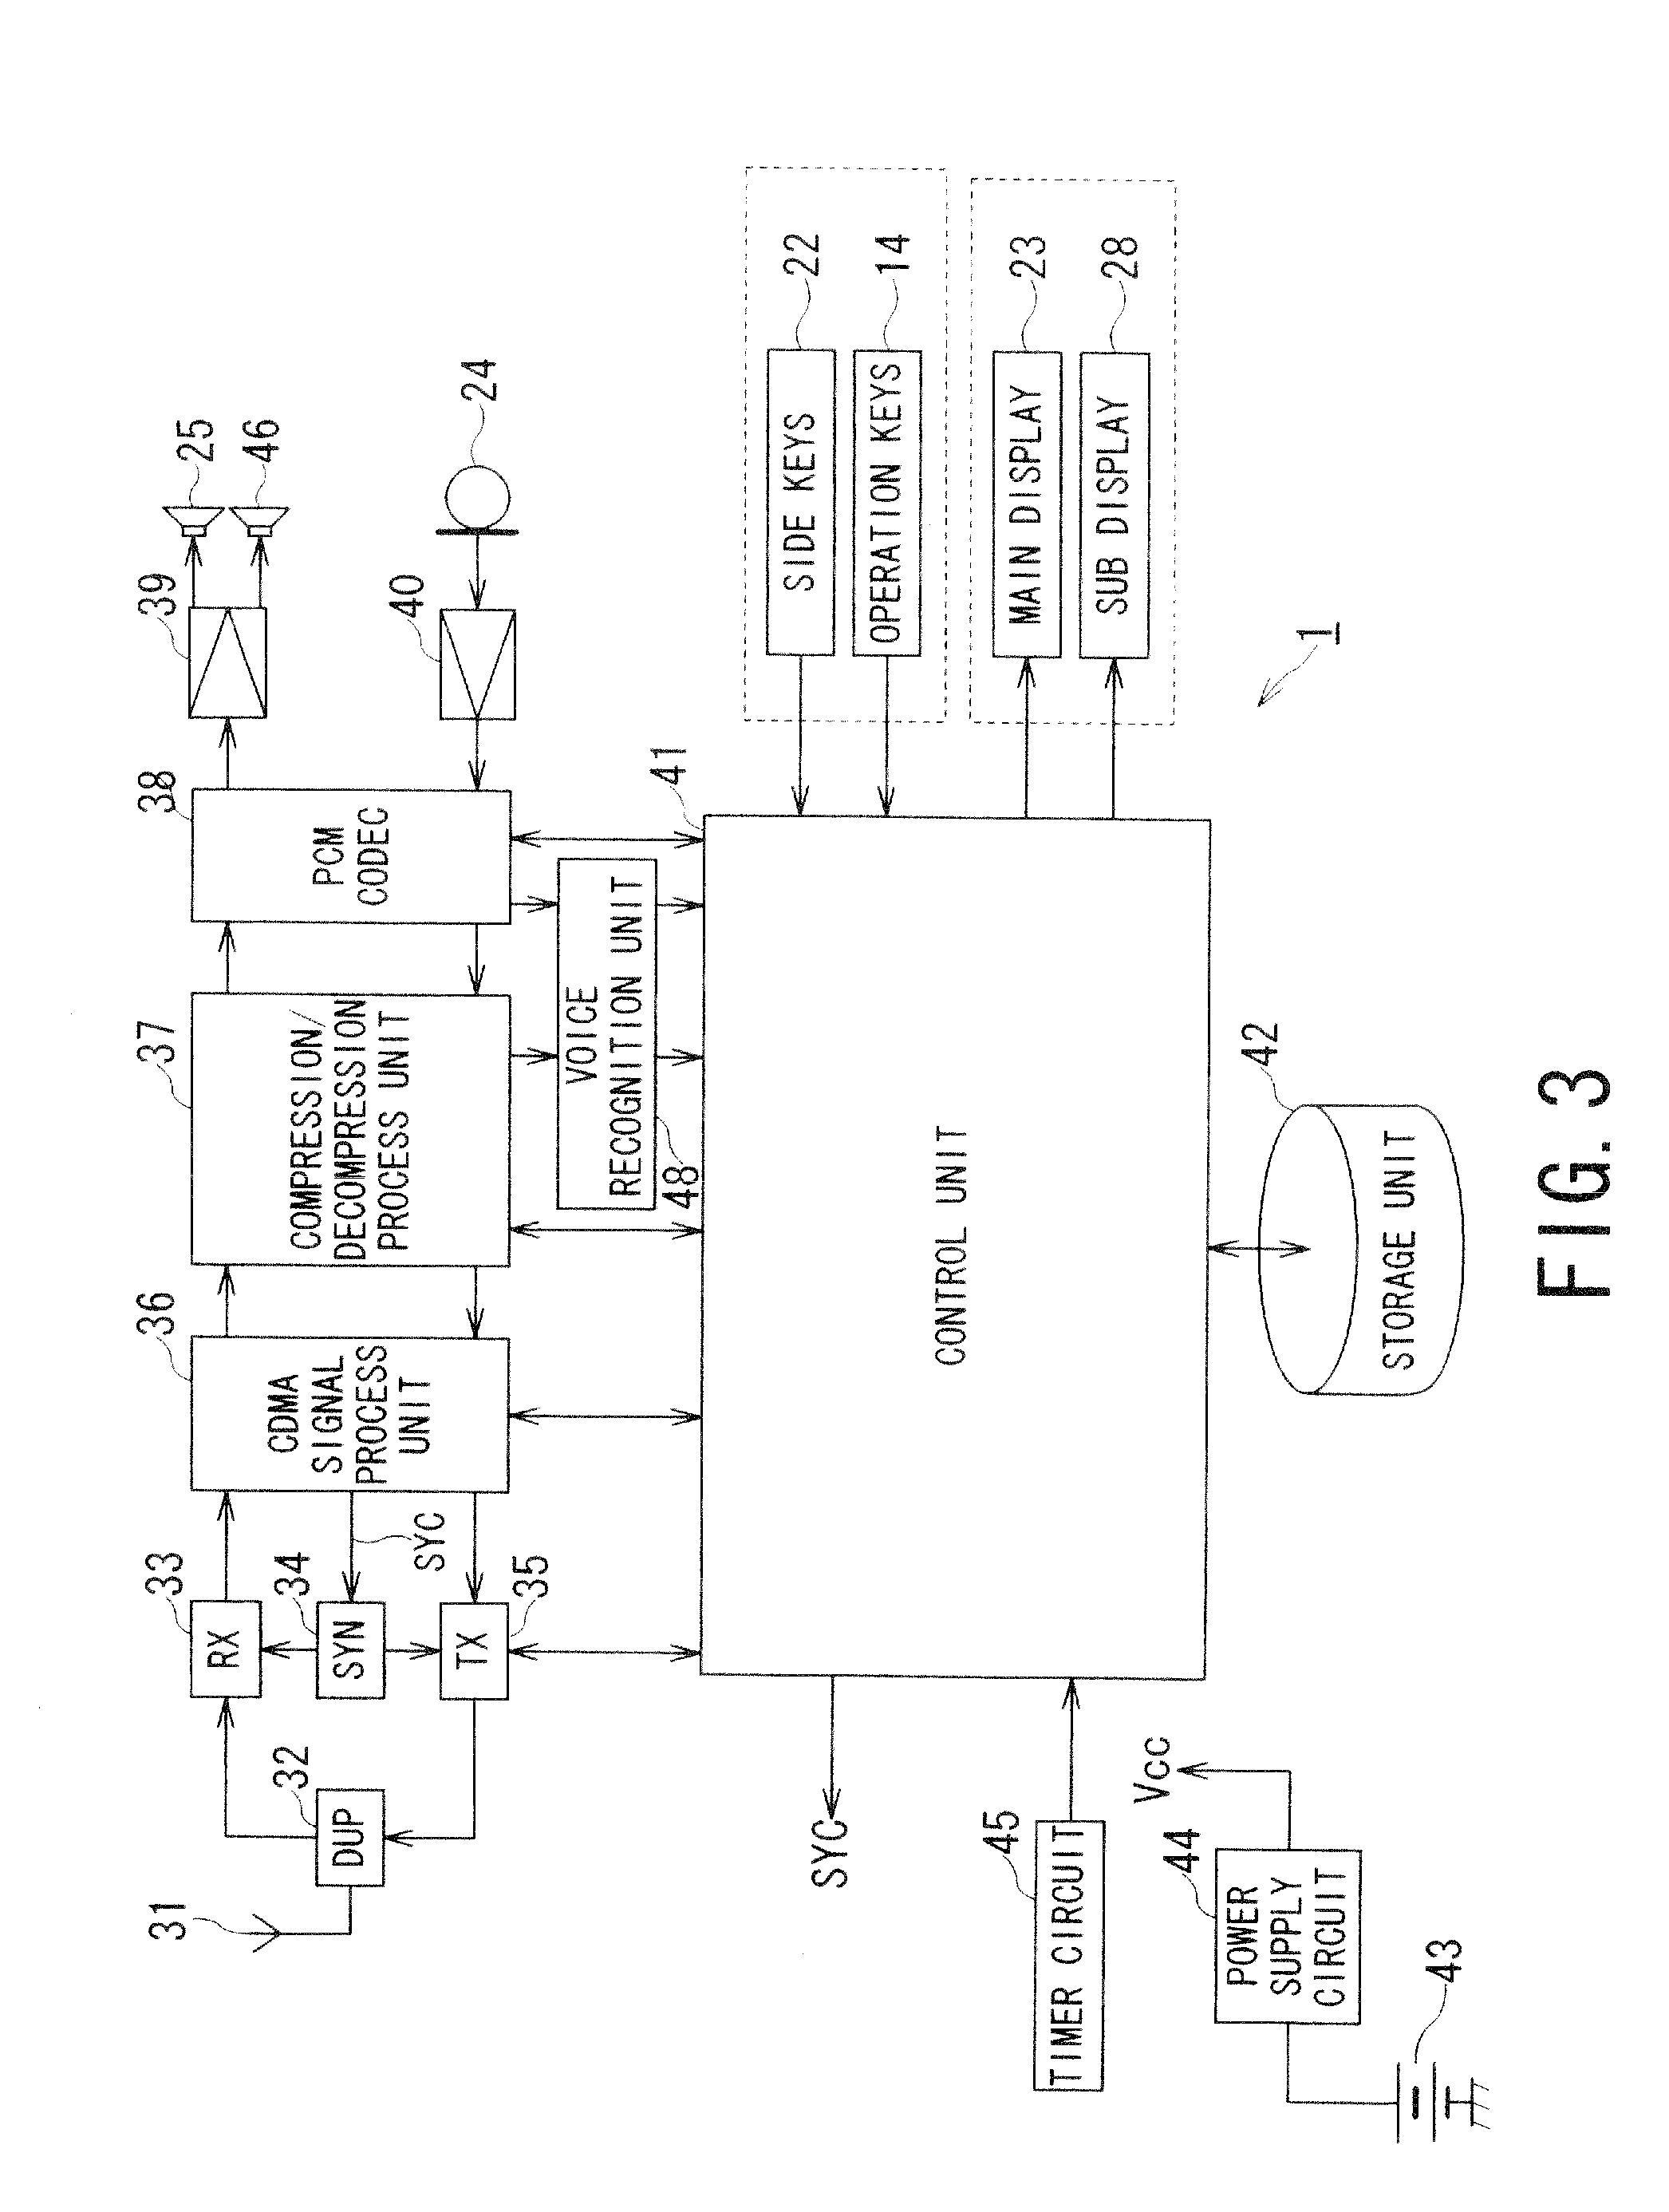 Mobile terminal and method of using text data obtained as result of voice recognition